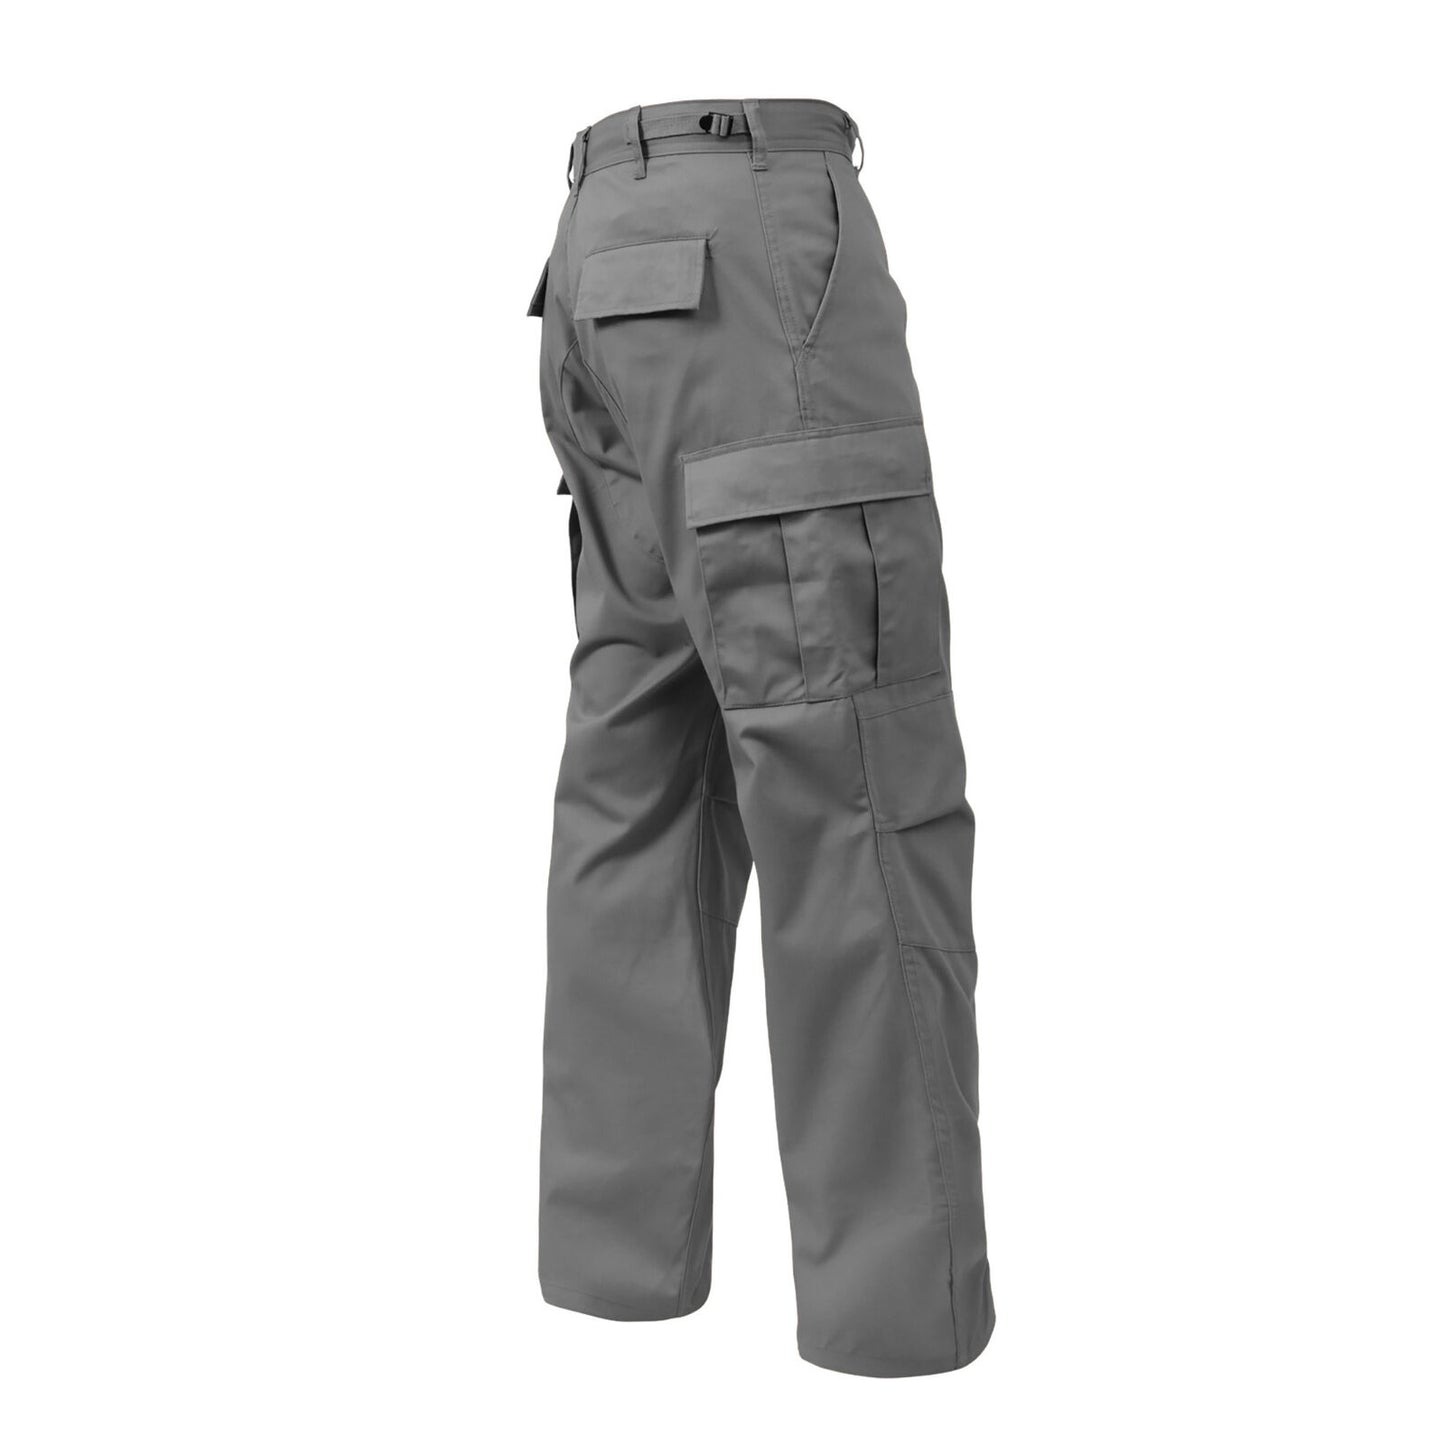 Rothco Relaxed Fit Zipper Fly BDU Pants in Grey